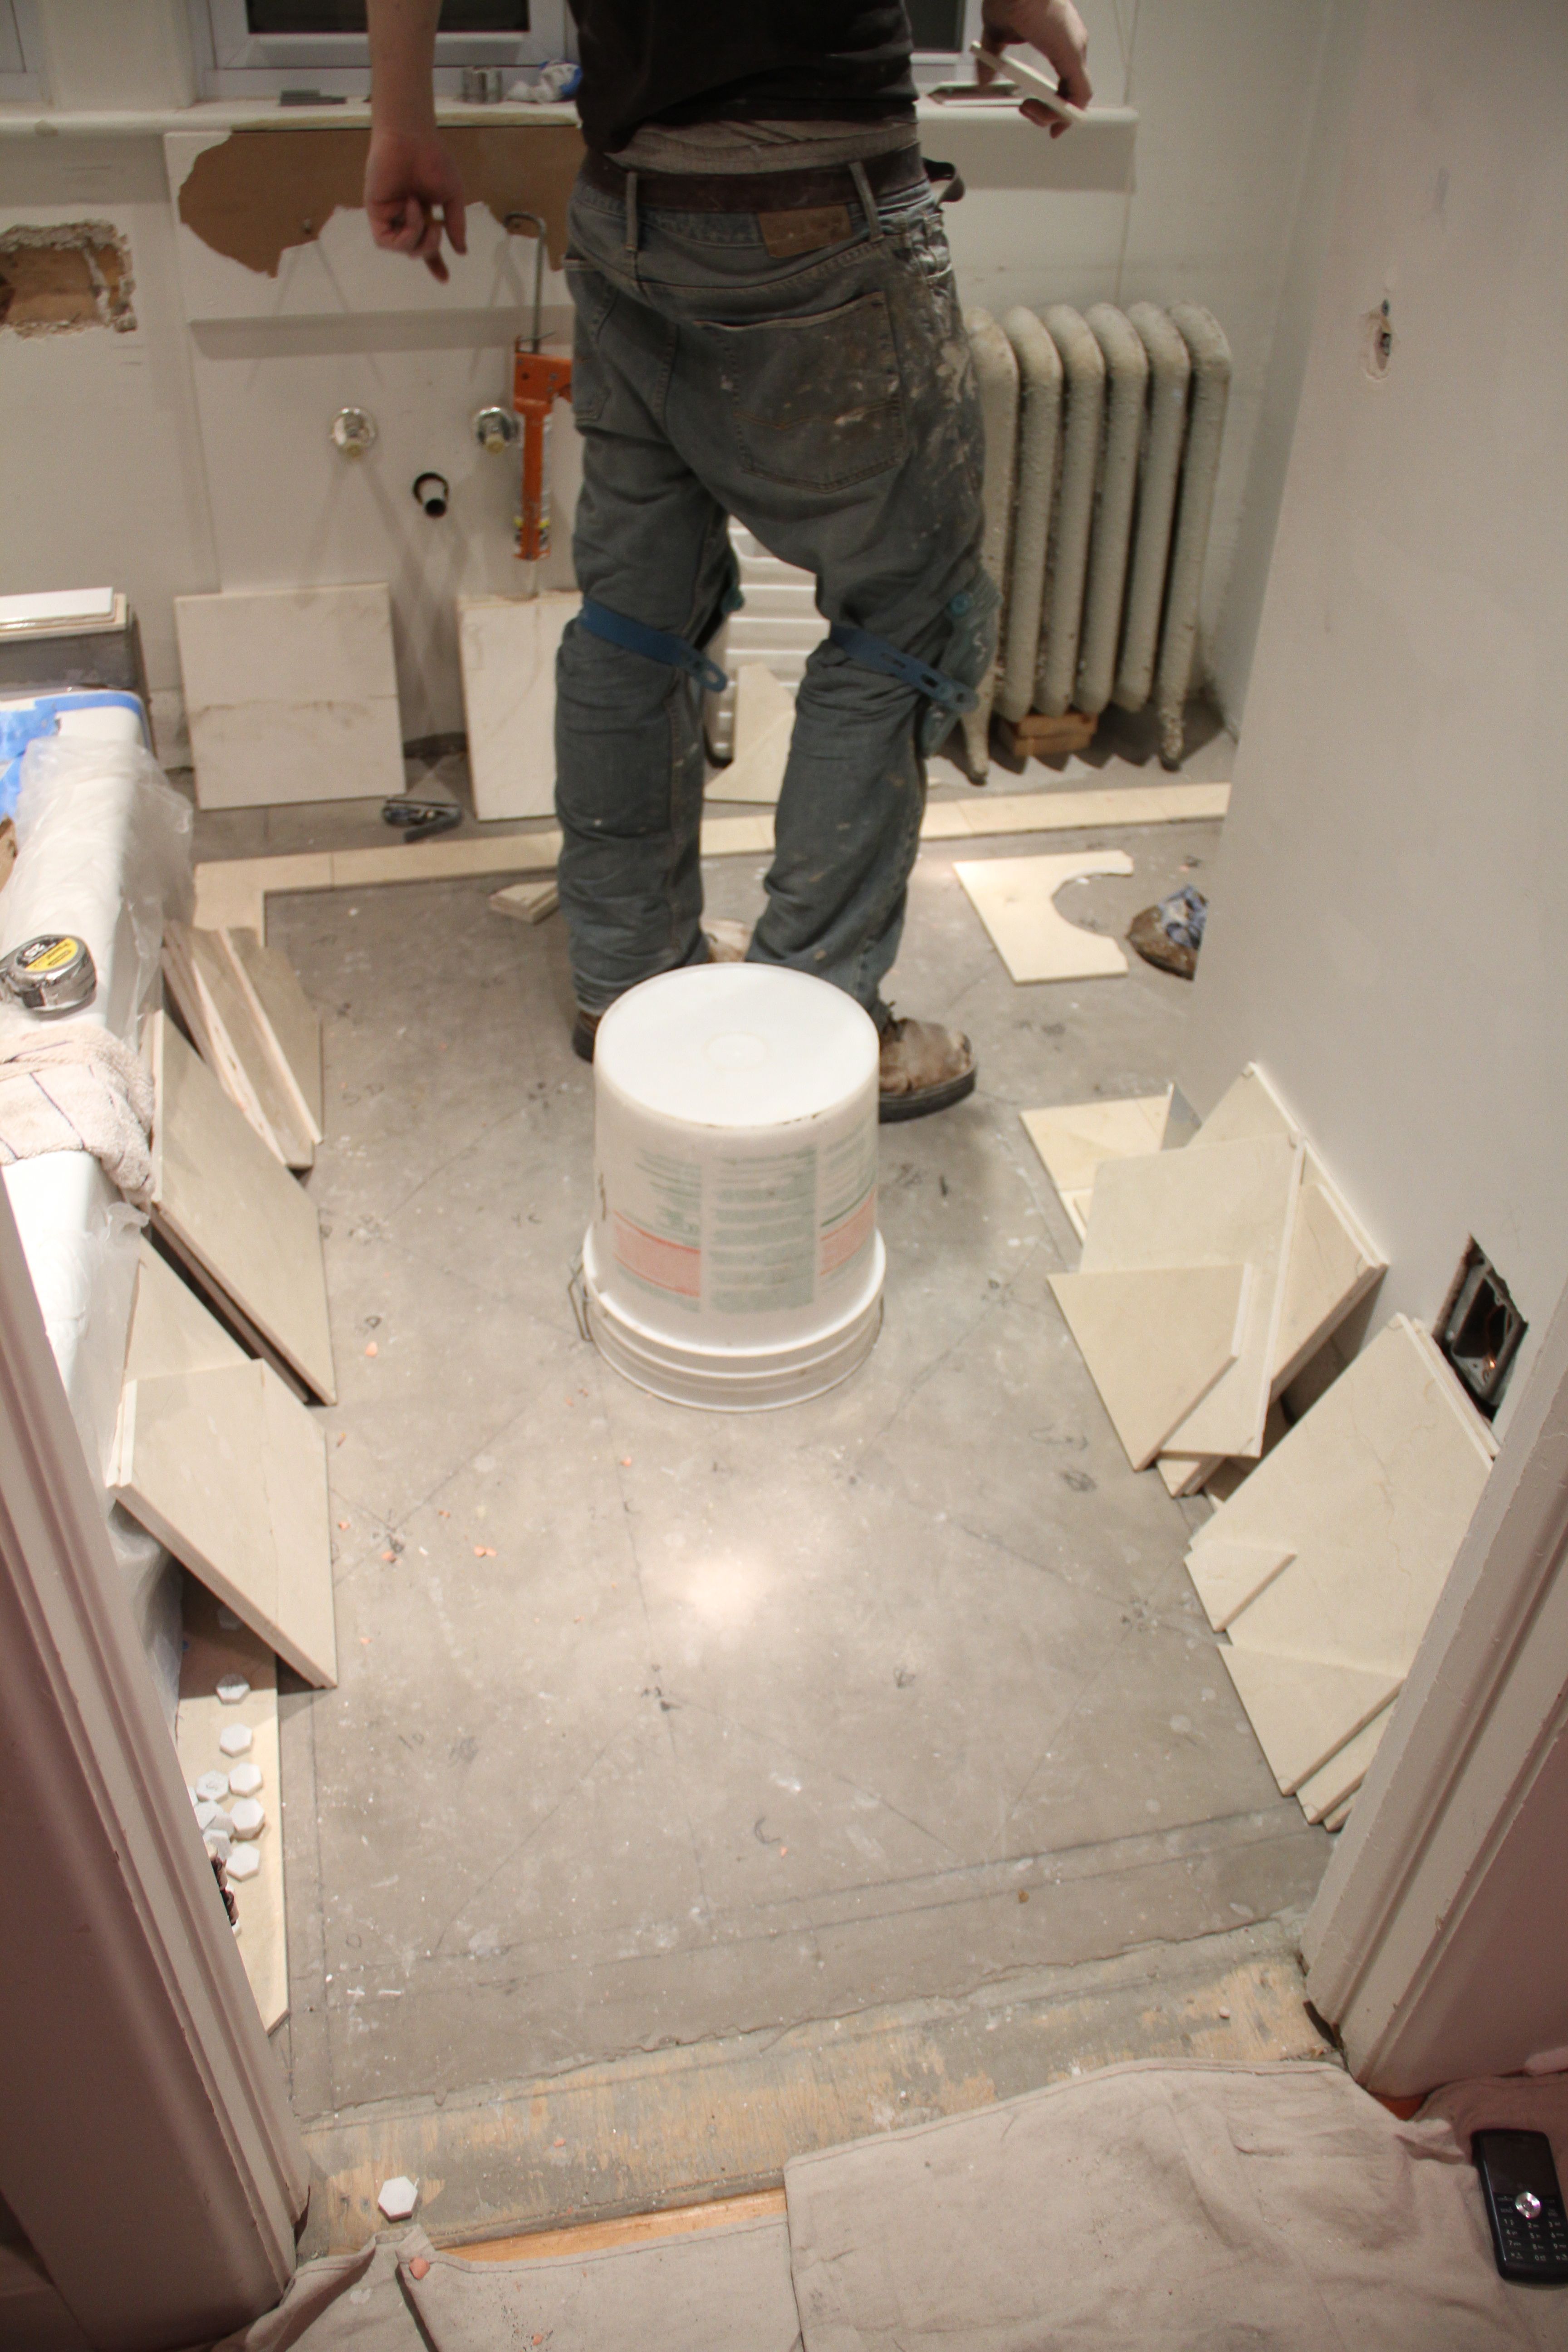 After the dry-fit, J.J. had to carefully label every tile, and pull them up off the floor so he could set them.